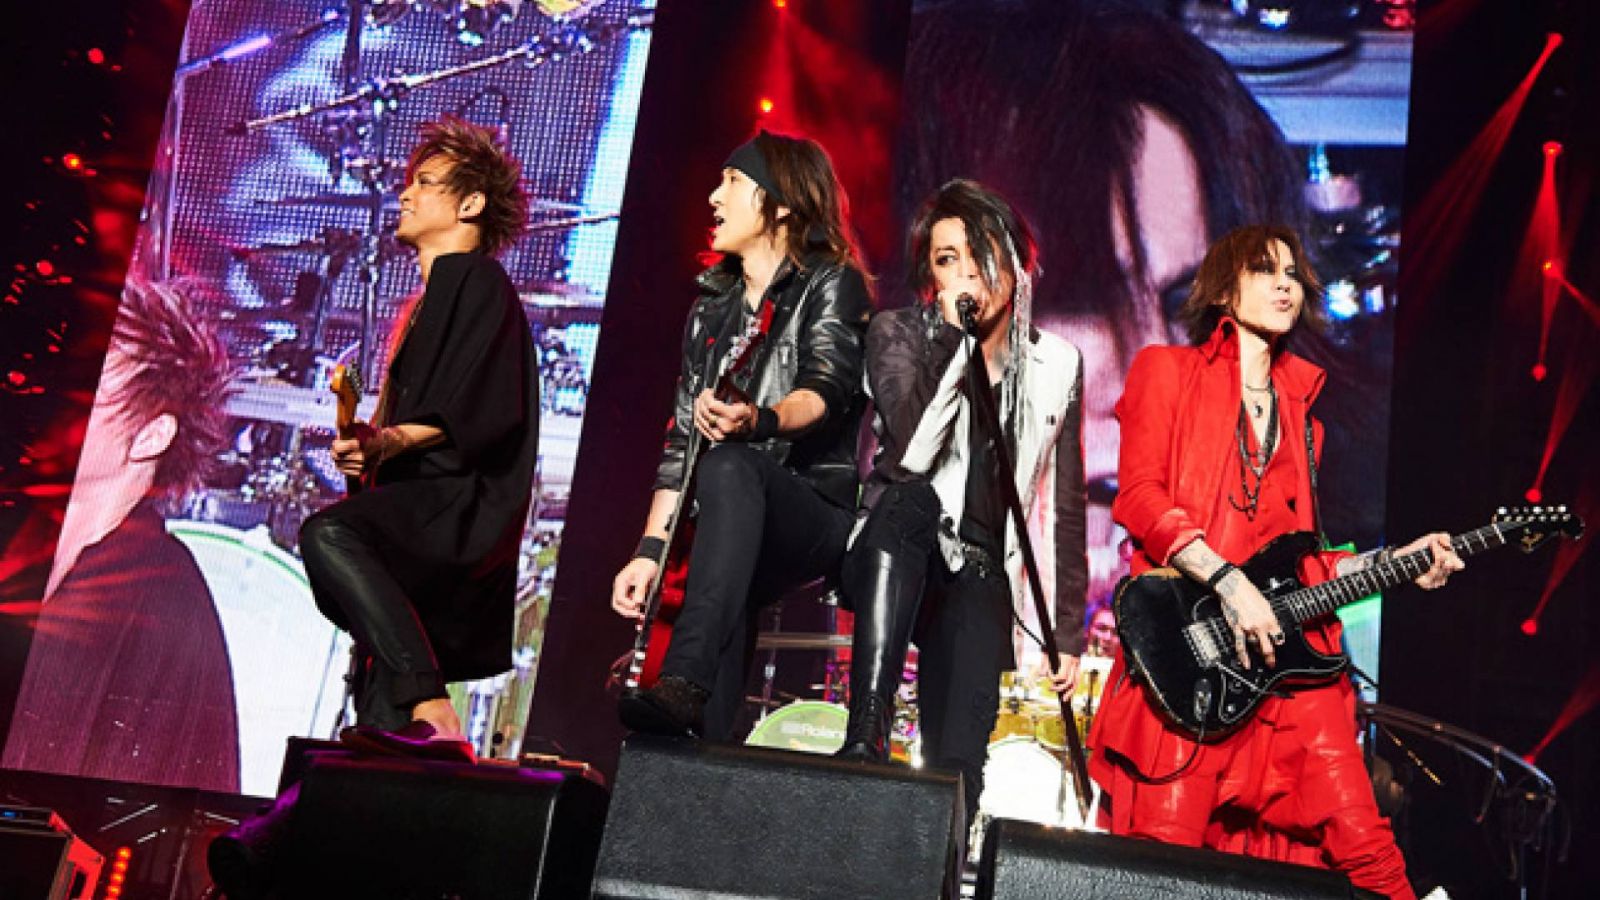 LUNA SEA “LUNATIC X’MAS 2018 -Introduction to the 30th Anniversary- IMAGE or REAL” at Saitama Super Arena © UNIVERSAL MUSIC LLC. All rights reserved.